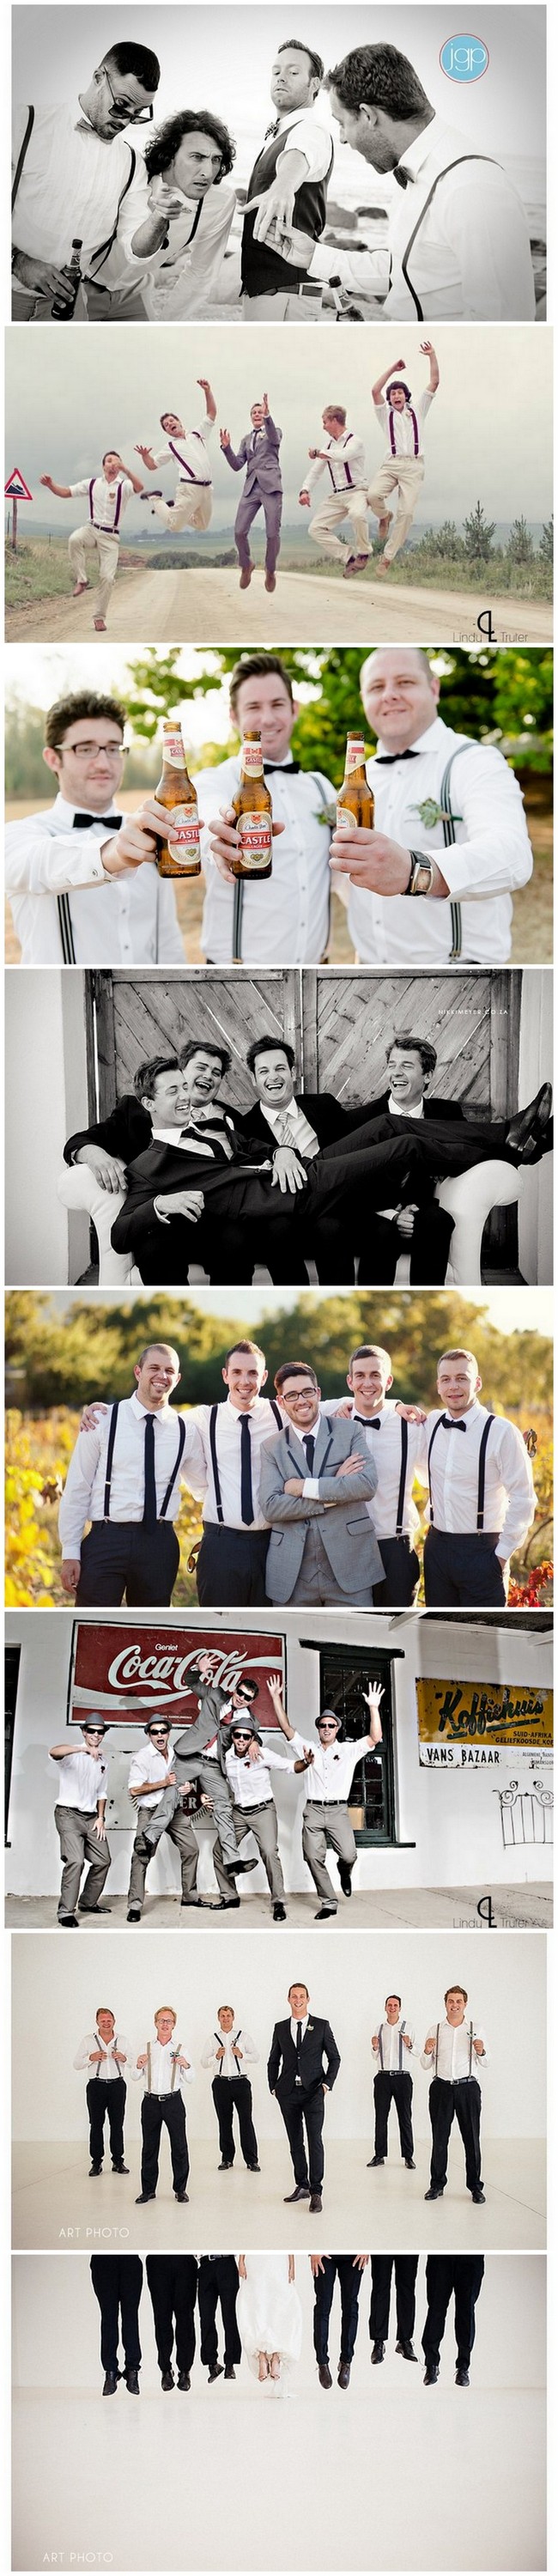 Groomsmen Wedding Photo Ideas and Poses https://confettidaydreams.com/wedding-photo-ideas-and-poses-for-your-wedding-party/